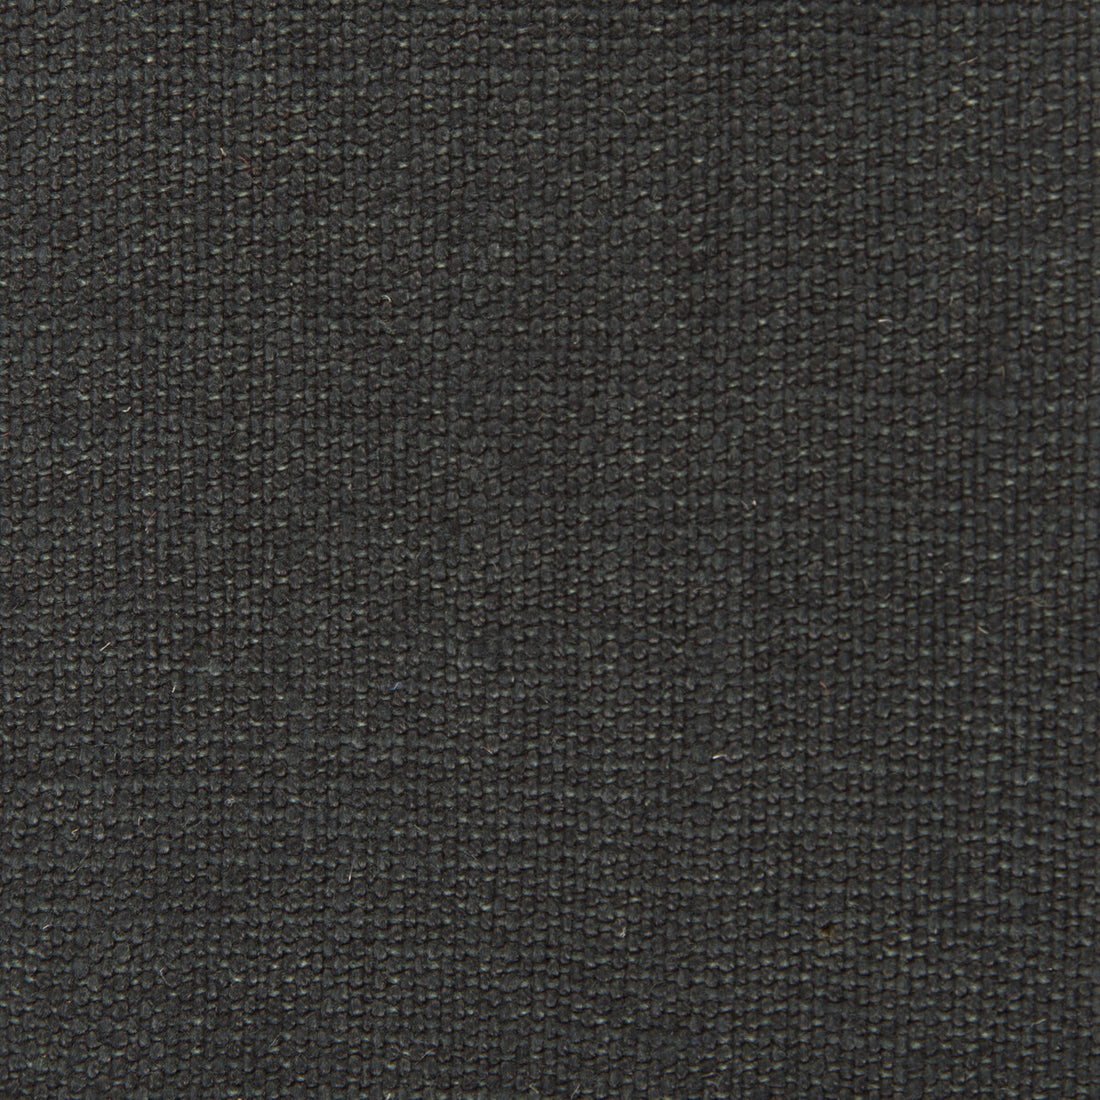 Nicaragua fabric in onyx color - pattern GDT5239.018.0 - by Gaston y Daniela in the Basics collection